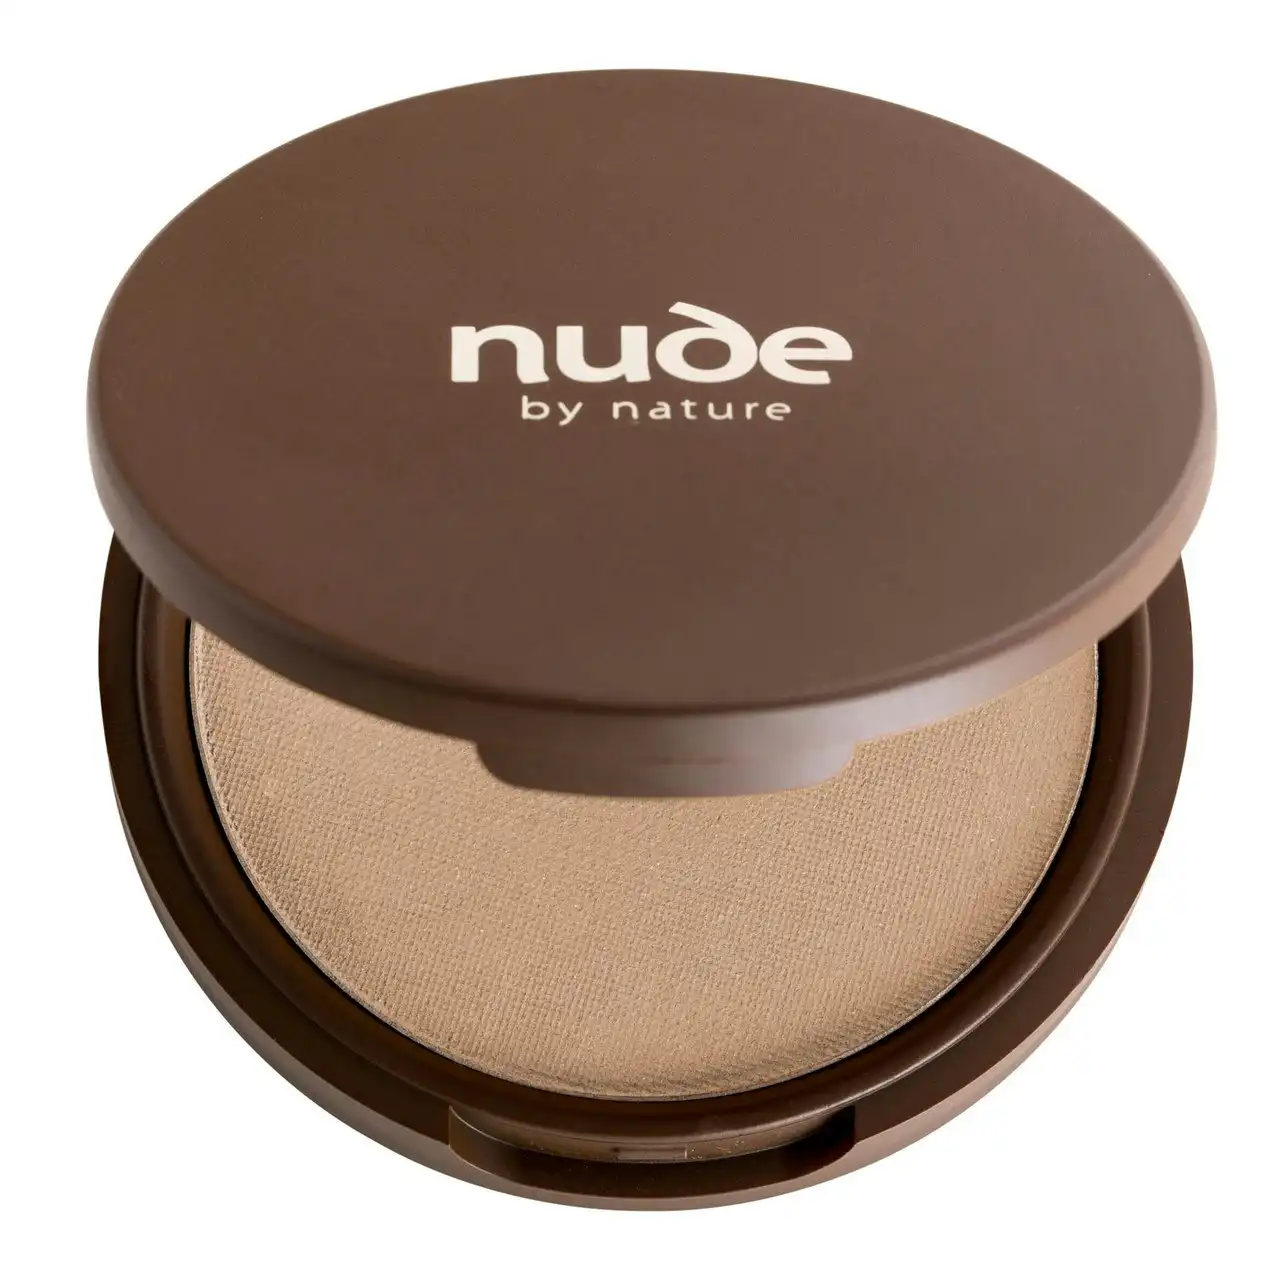 Nude by Nature Pressed Mineral Cover Foundation 10g Medium